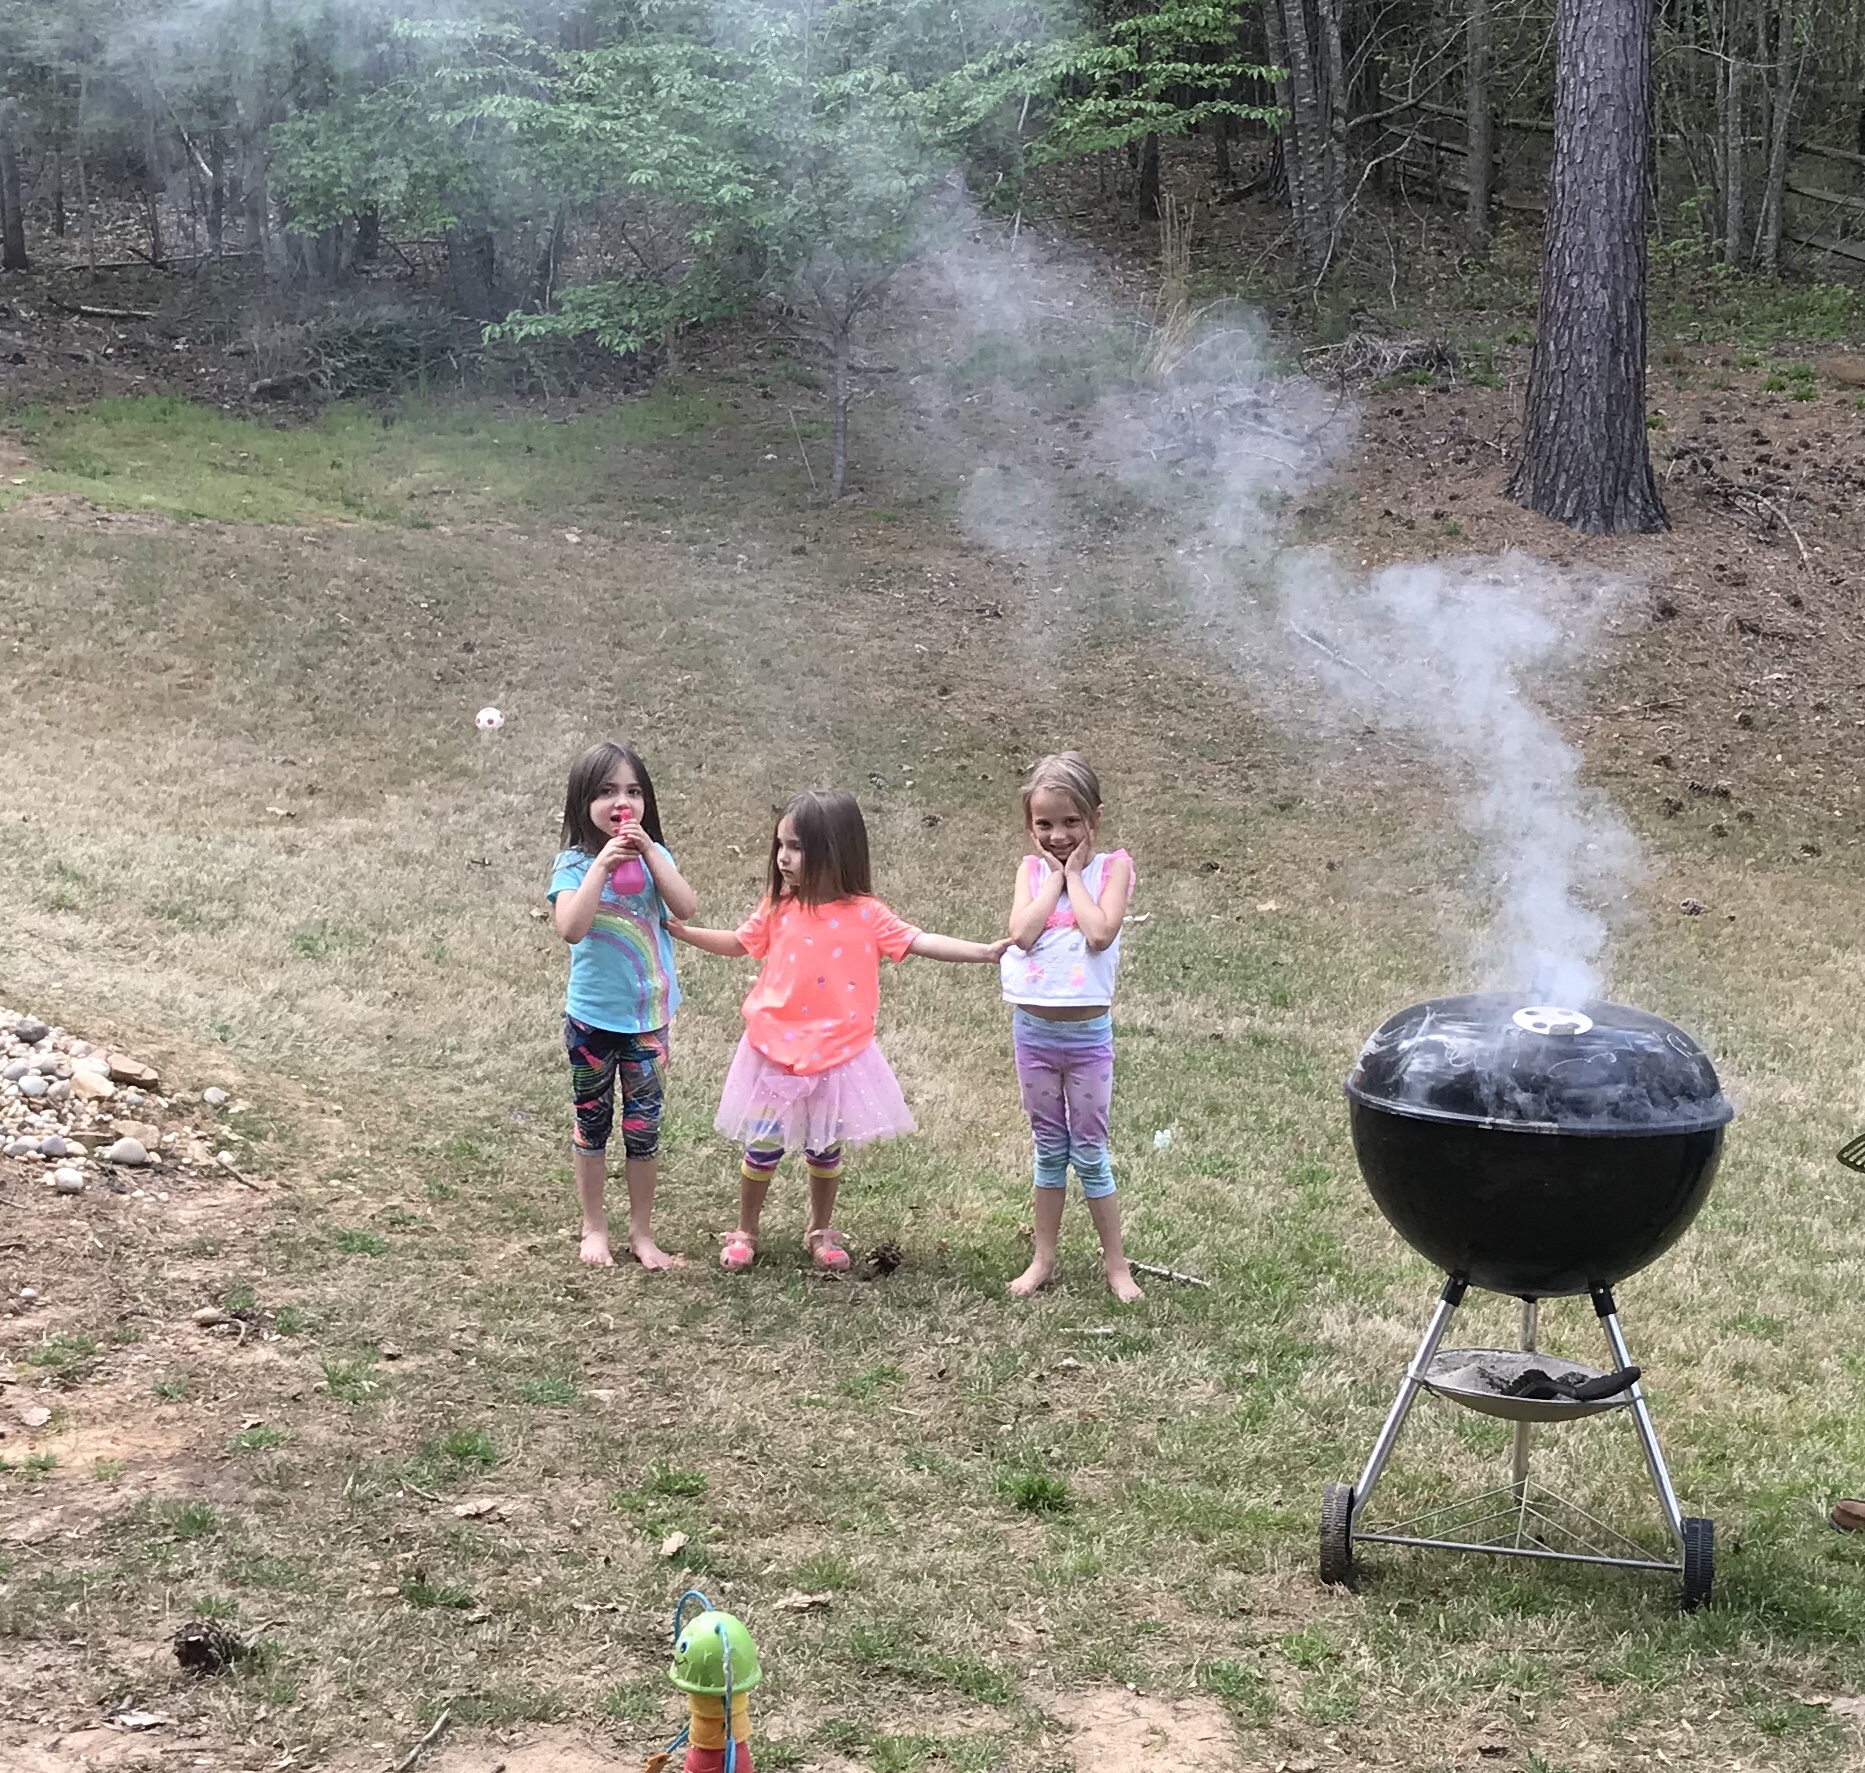 Children playing in backyard while grilling